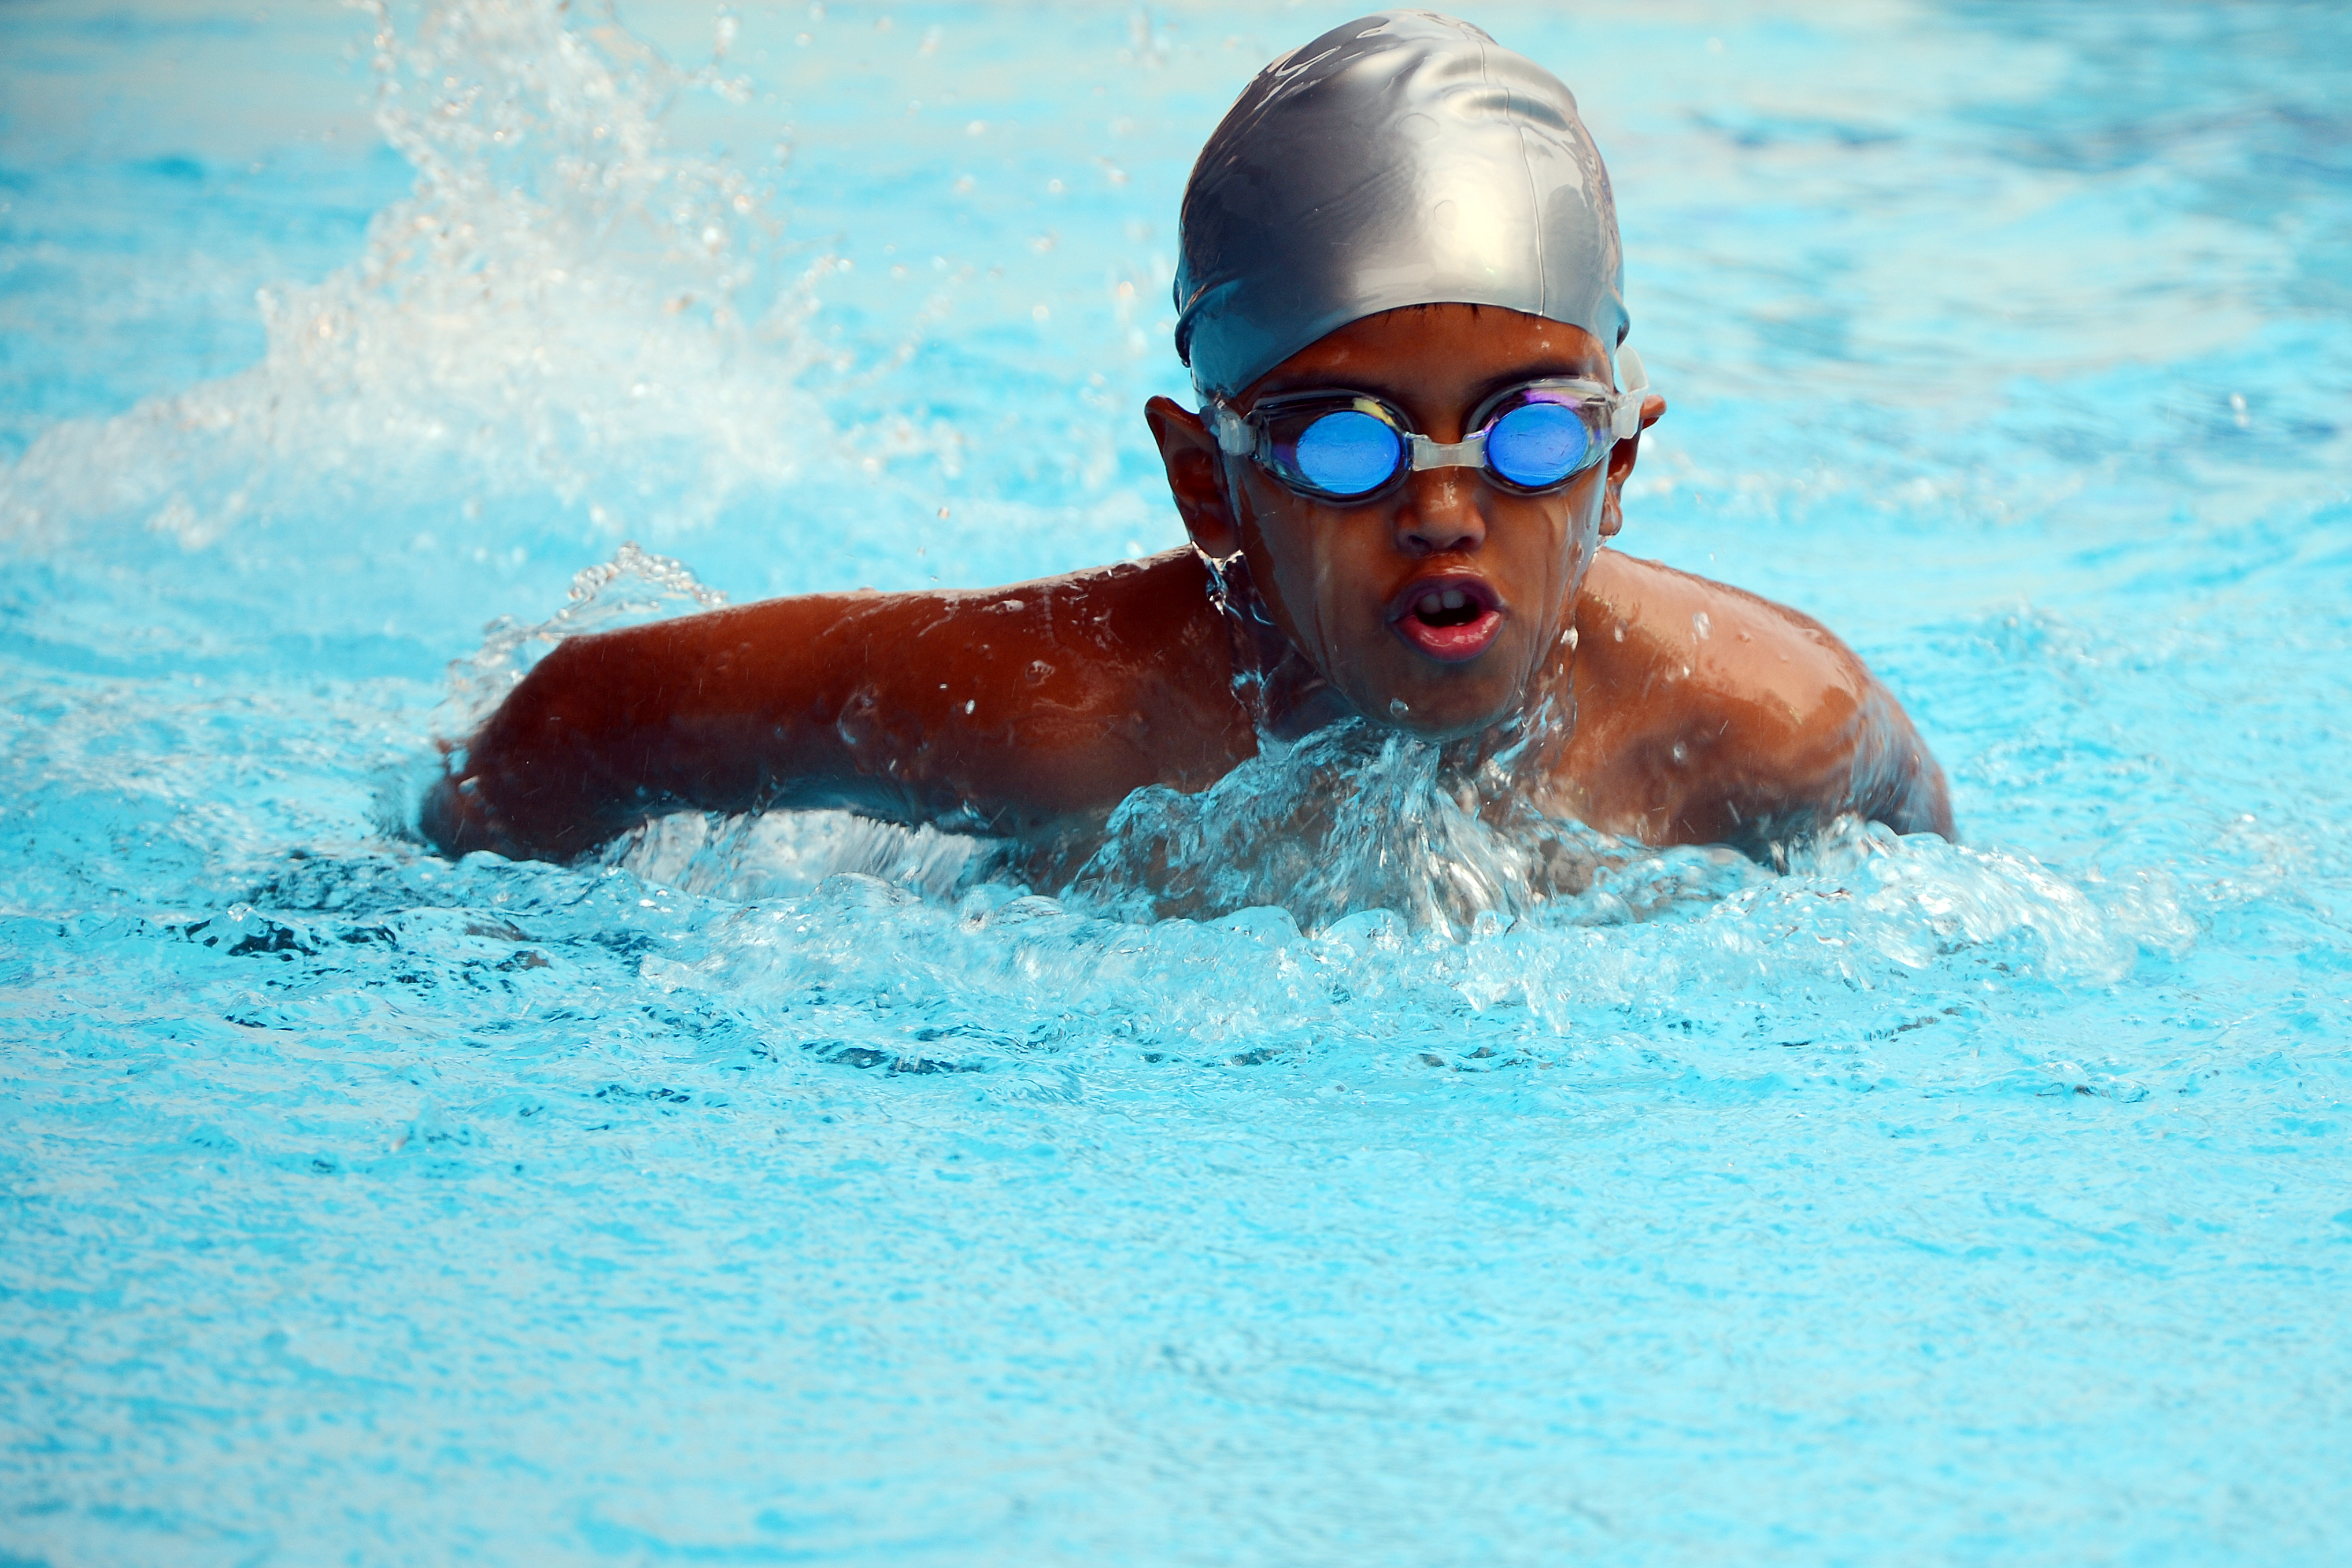 Young boy in sliver swimming cap and blue goggles doing butterfly swim stroke